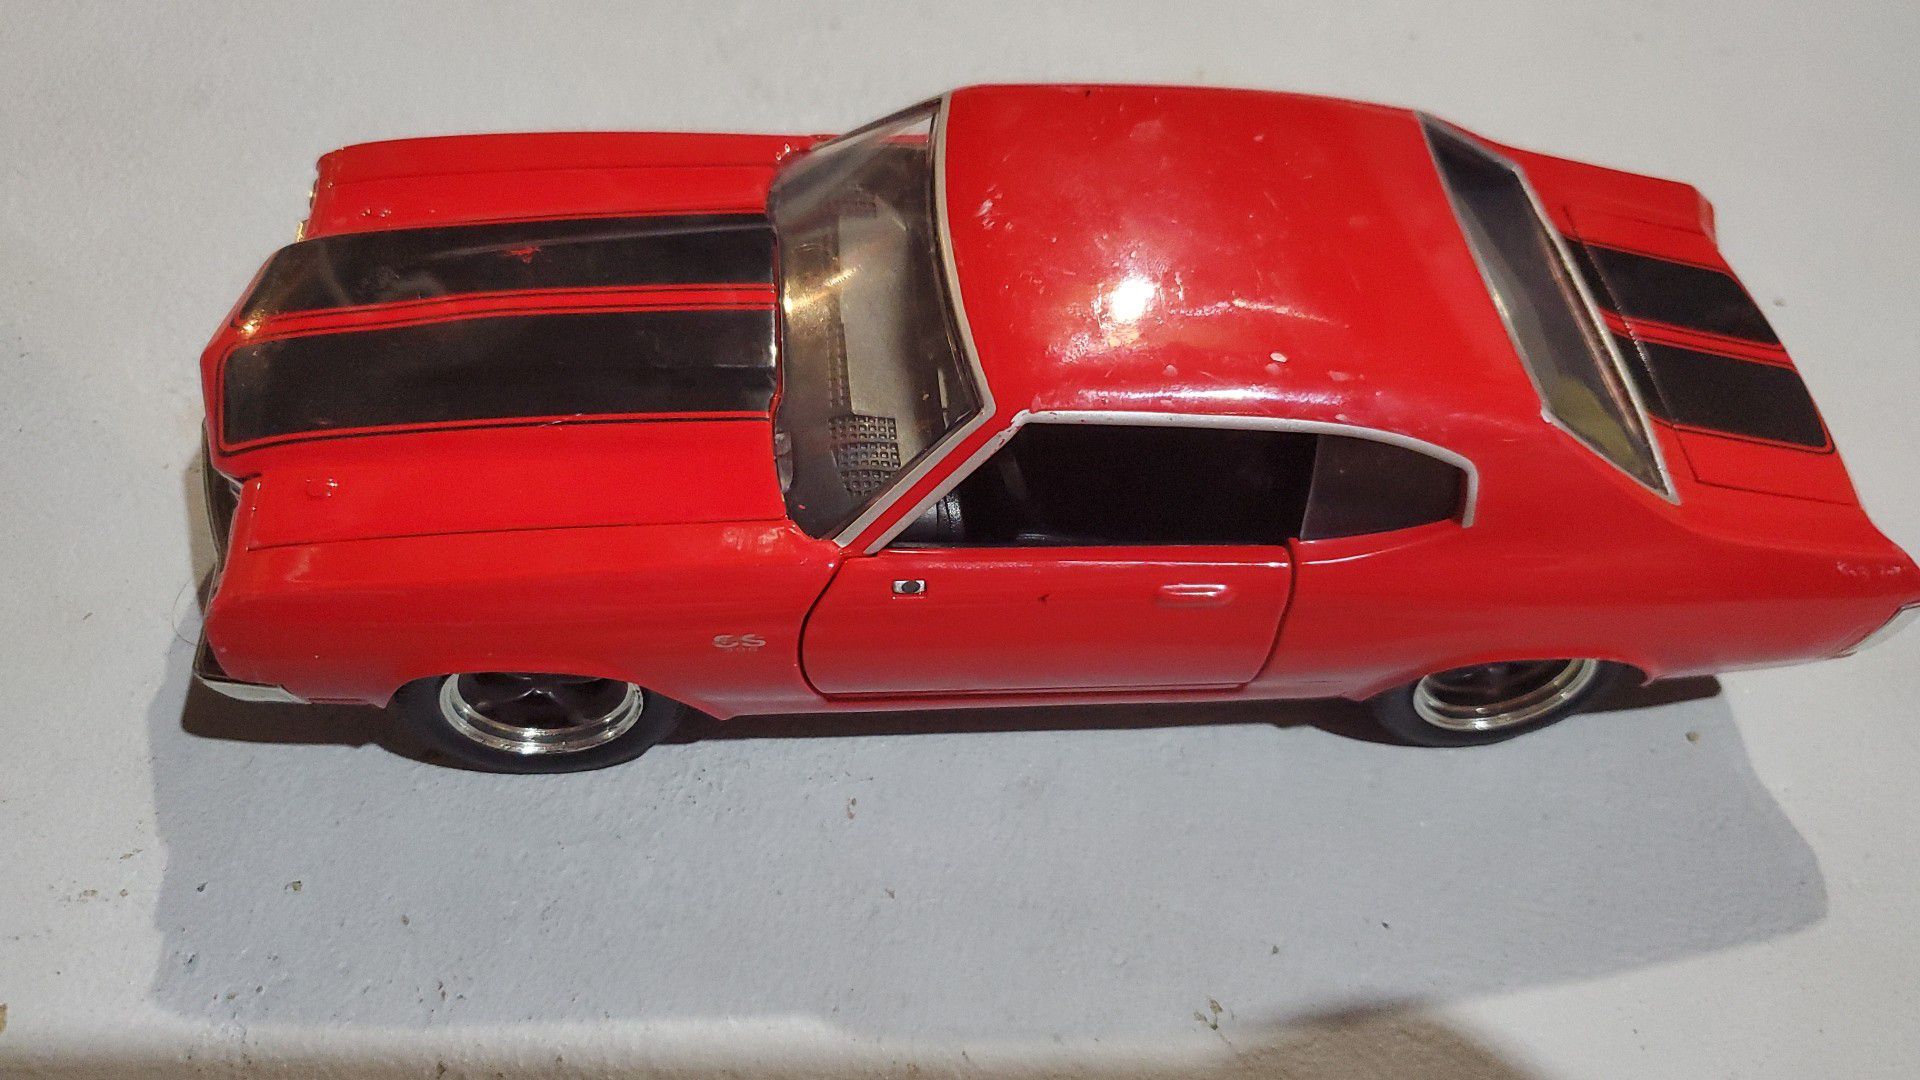 Chevelle SS toy model car